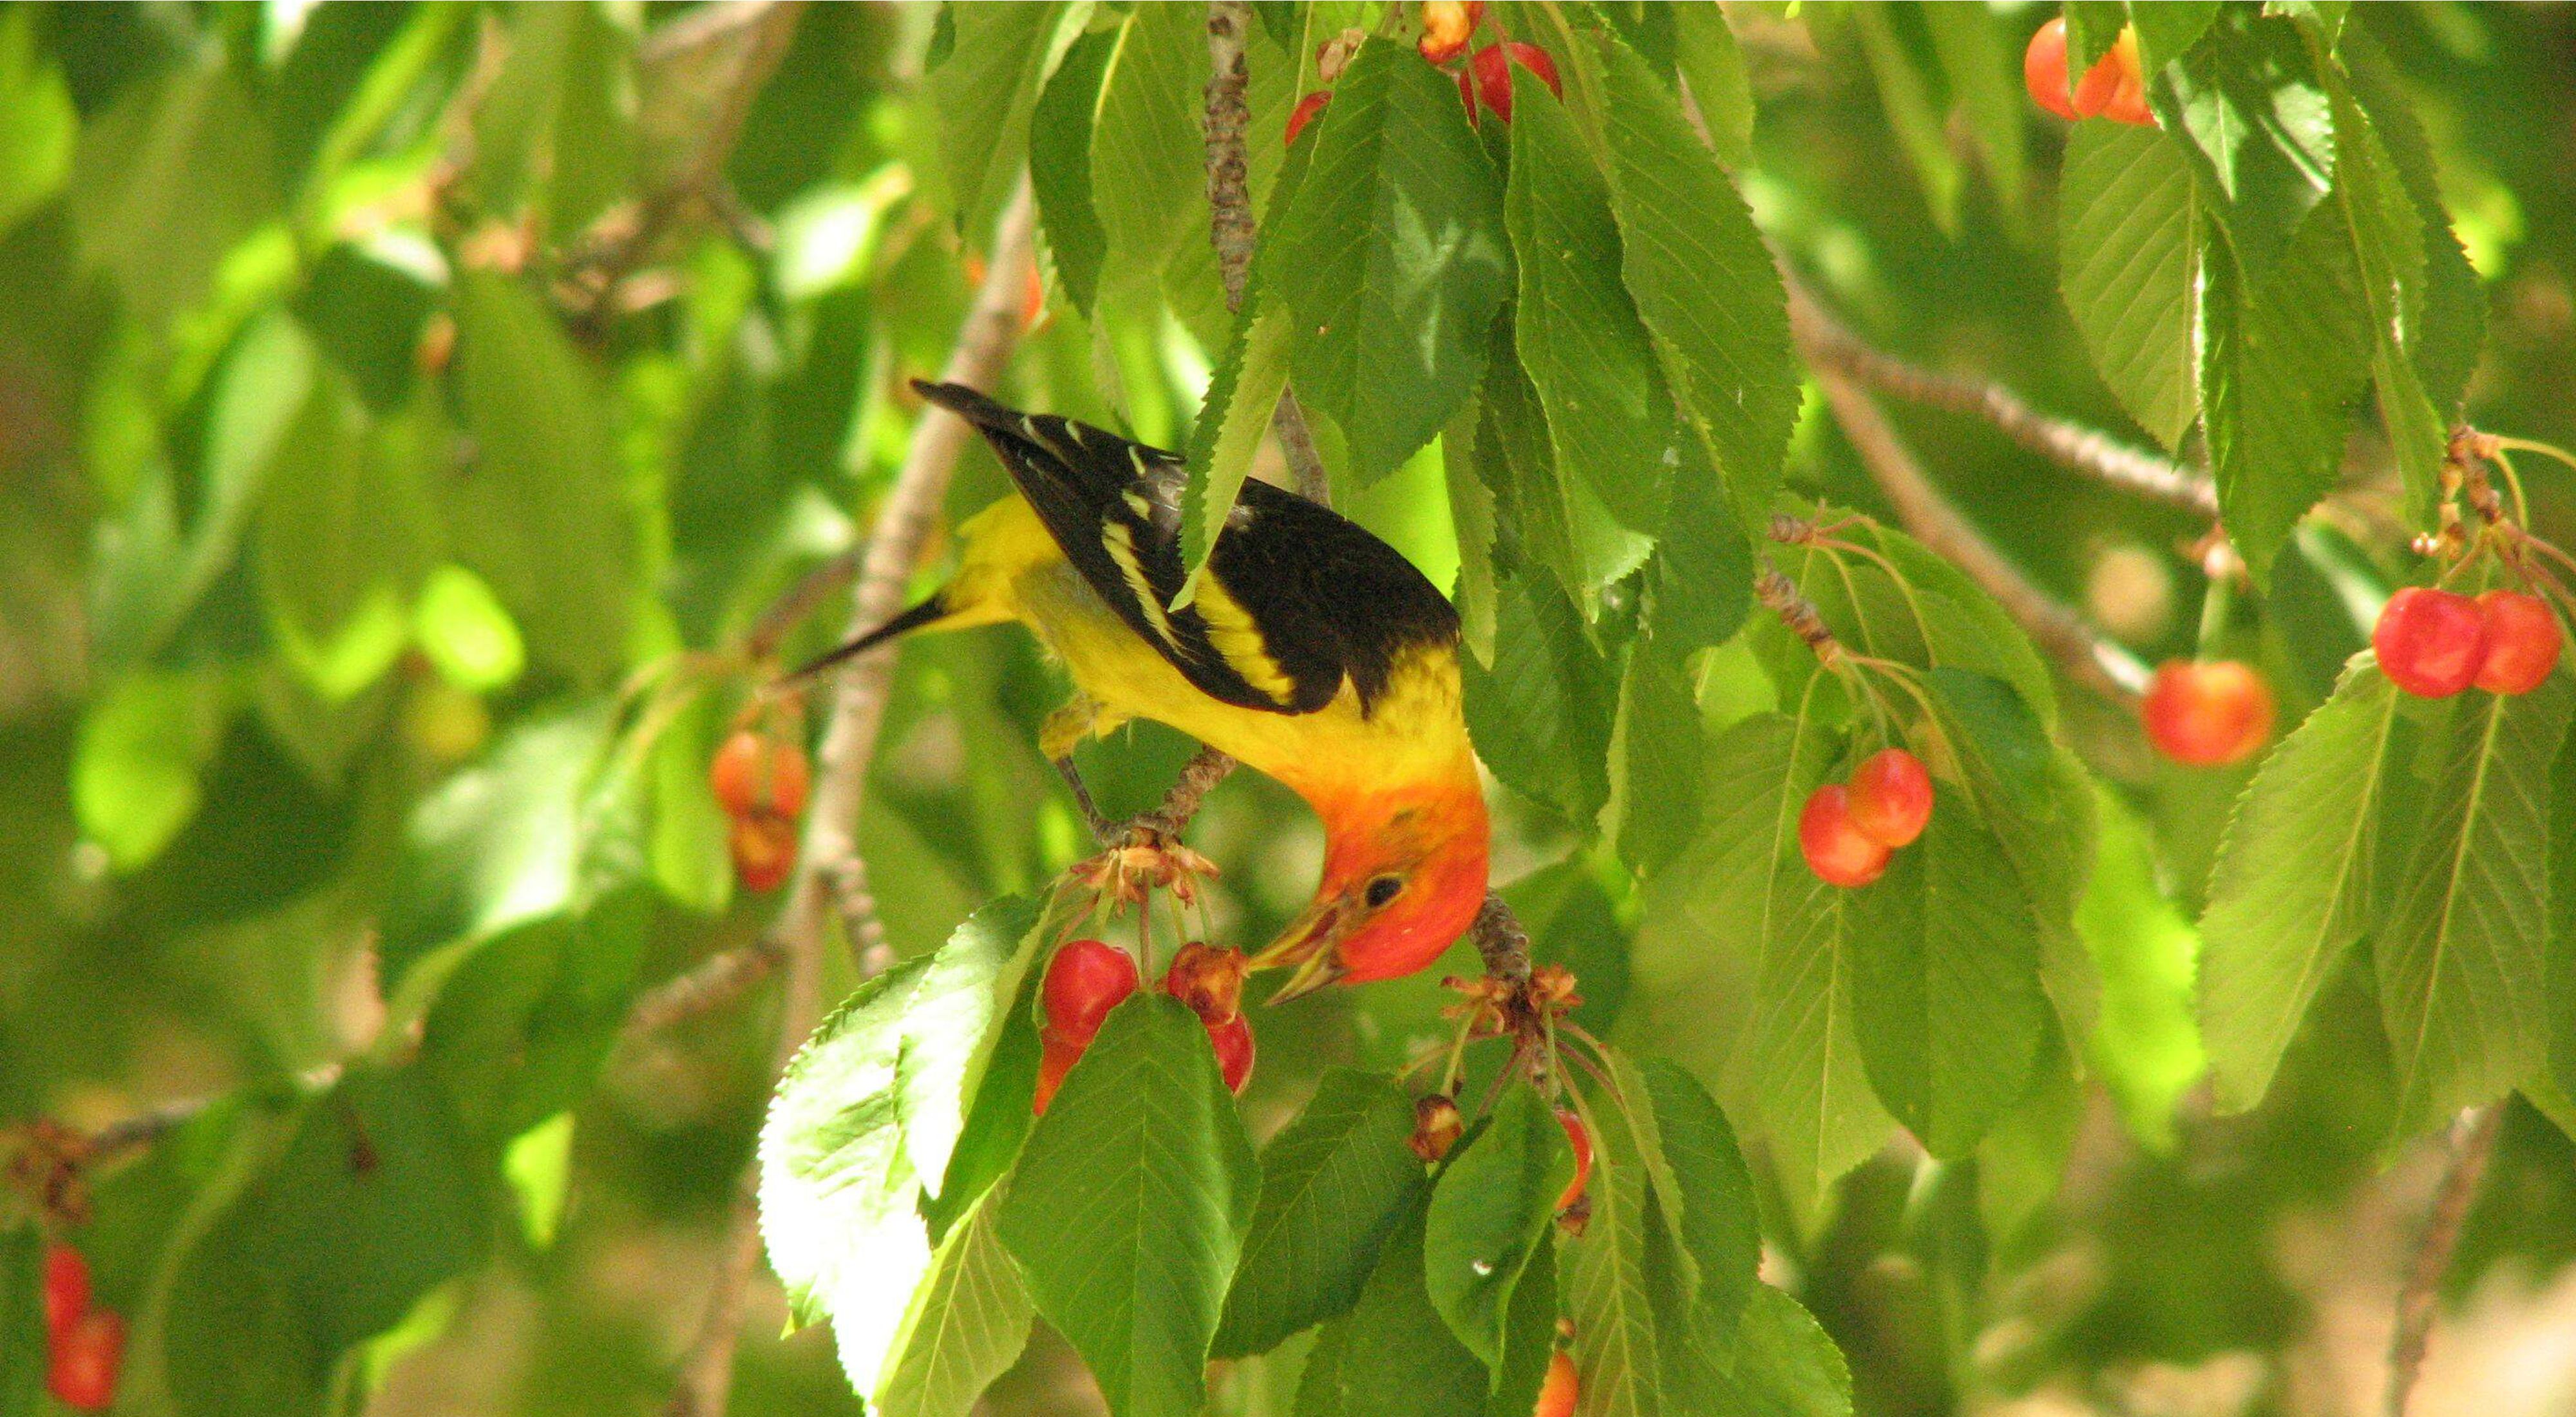 A yellow bird with black wings and a red head eat red berries while sitting on a branch surrounded by green leaves.